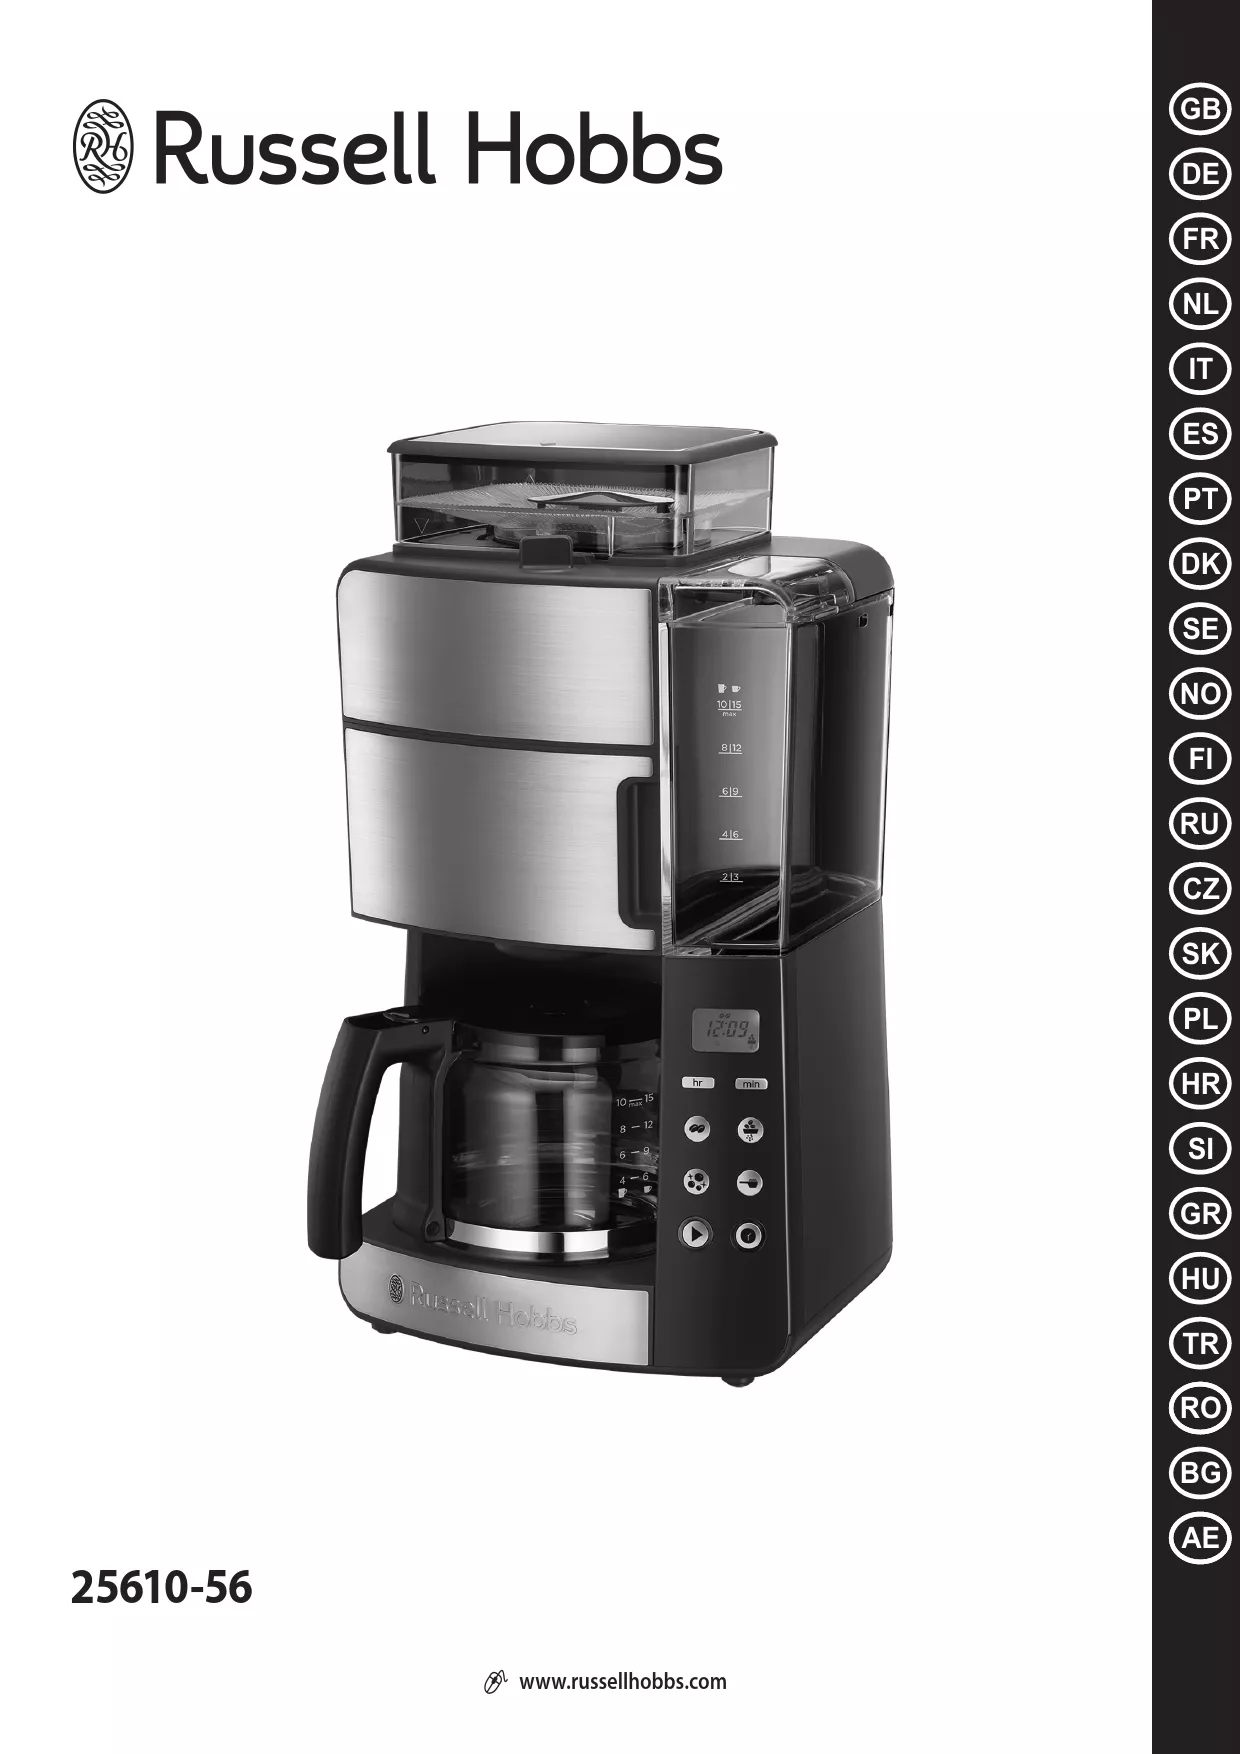 Mode d'emploi RUSSELL HOBBS GRIND AND BREW GLASS CARAFE